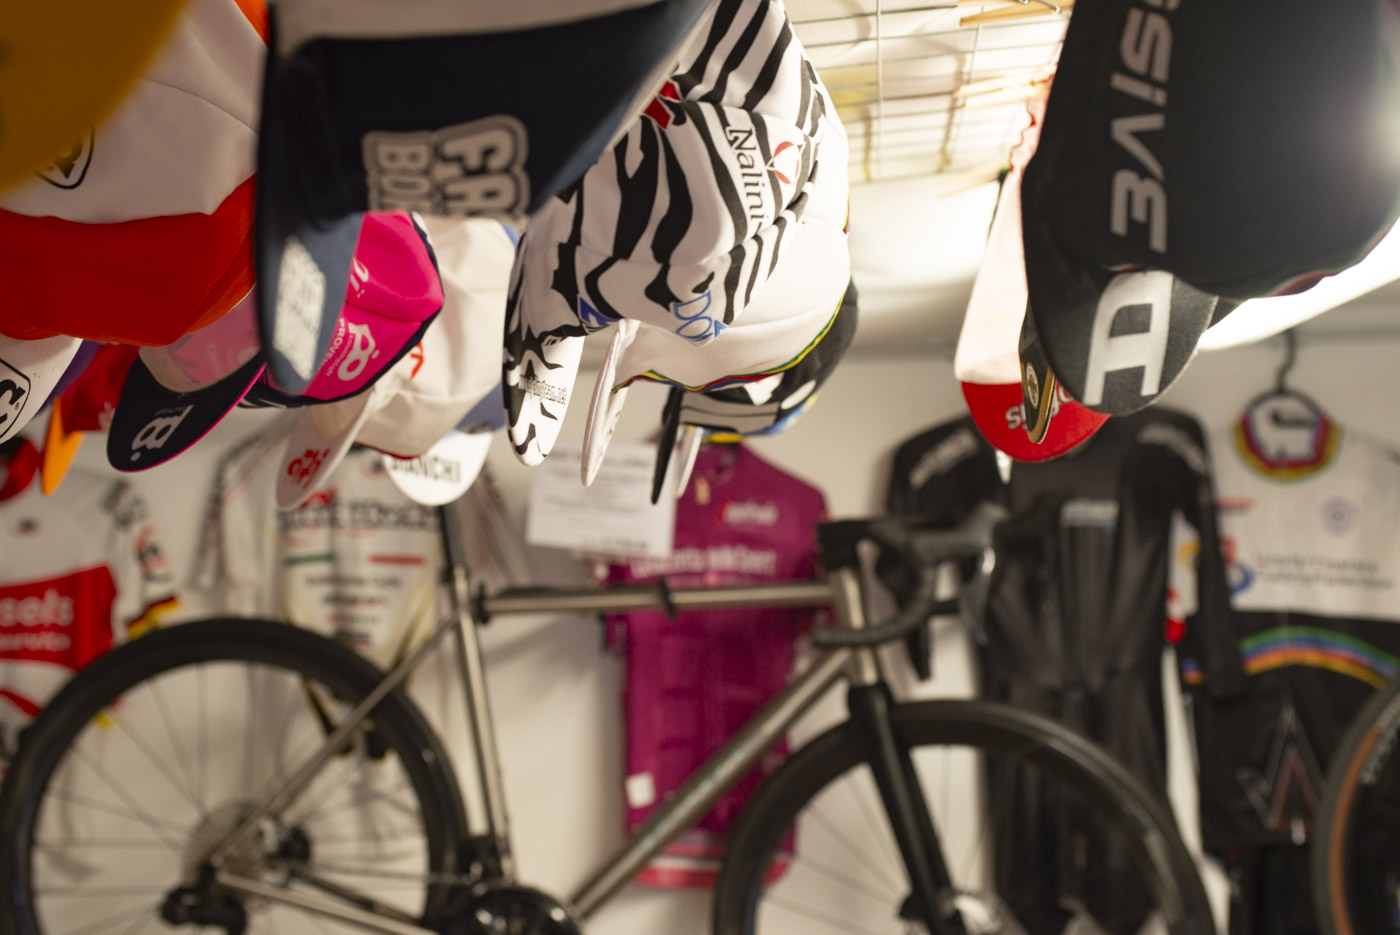 Cycling caps hanging in front of the Pilot Celes titanium road bike